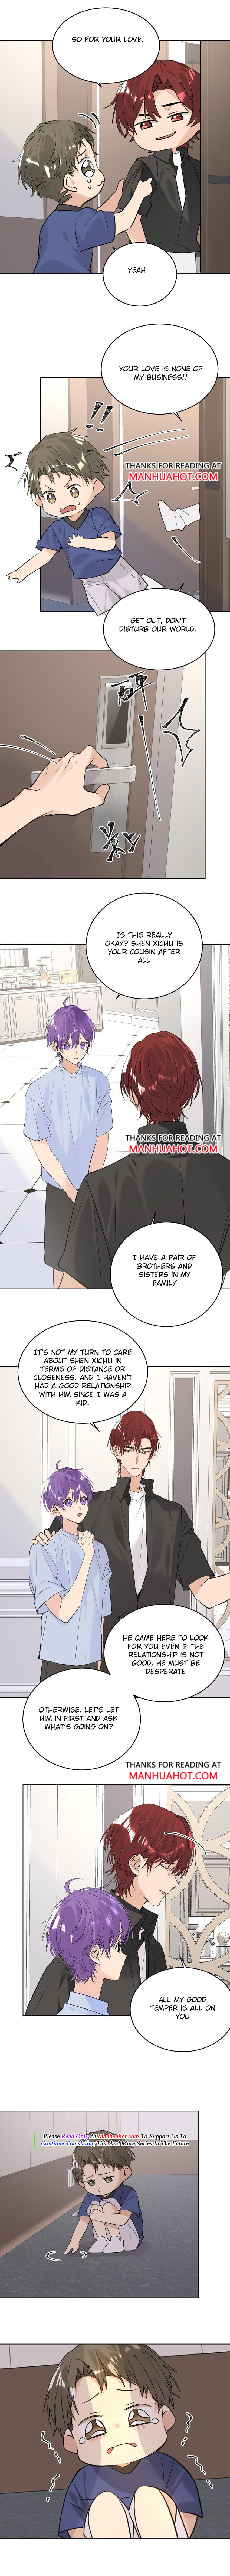 Did The Nerd Manage To Flirt With The Cutie Today? - chapter 76 - #2